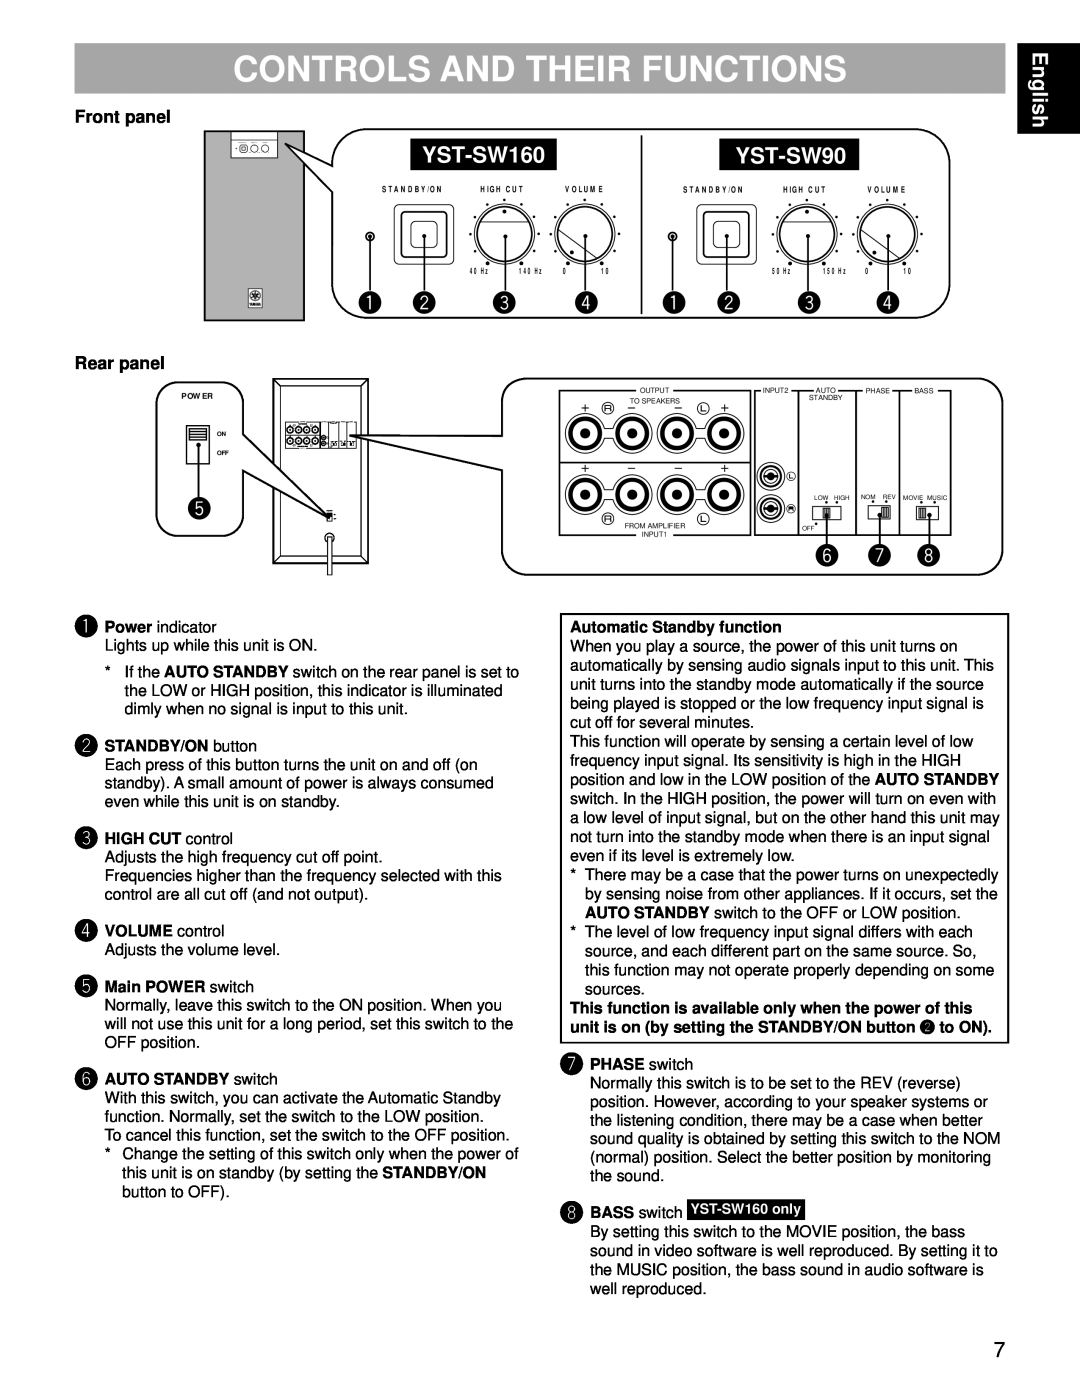 Yamaha YST-SW160/90 Controls And Their Functions, YST-SW90, English, ŸSTANDBY/ON button, HIGH CUT control, #PHASE switch 